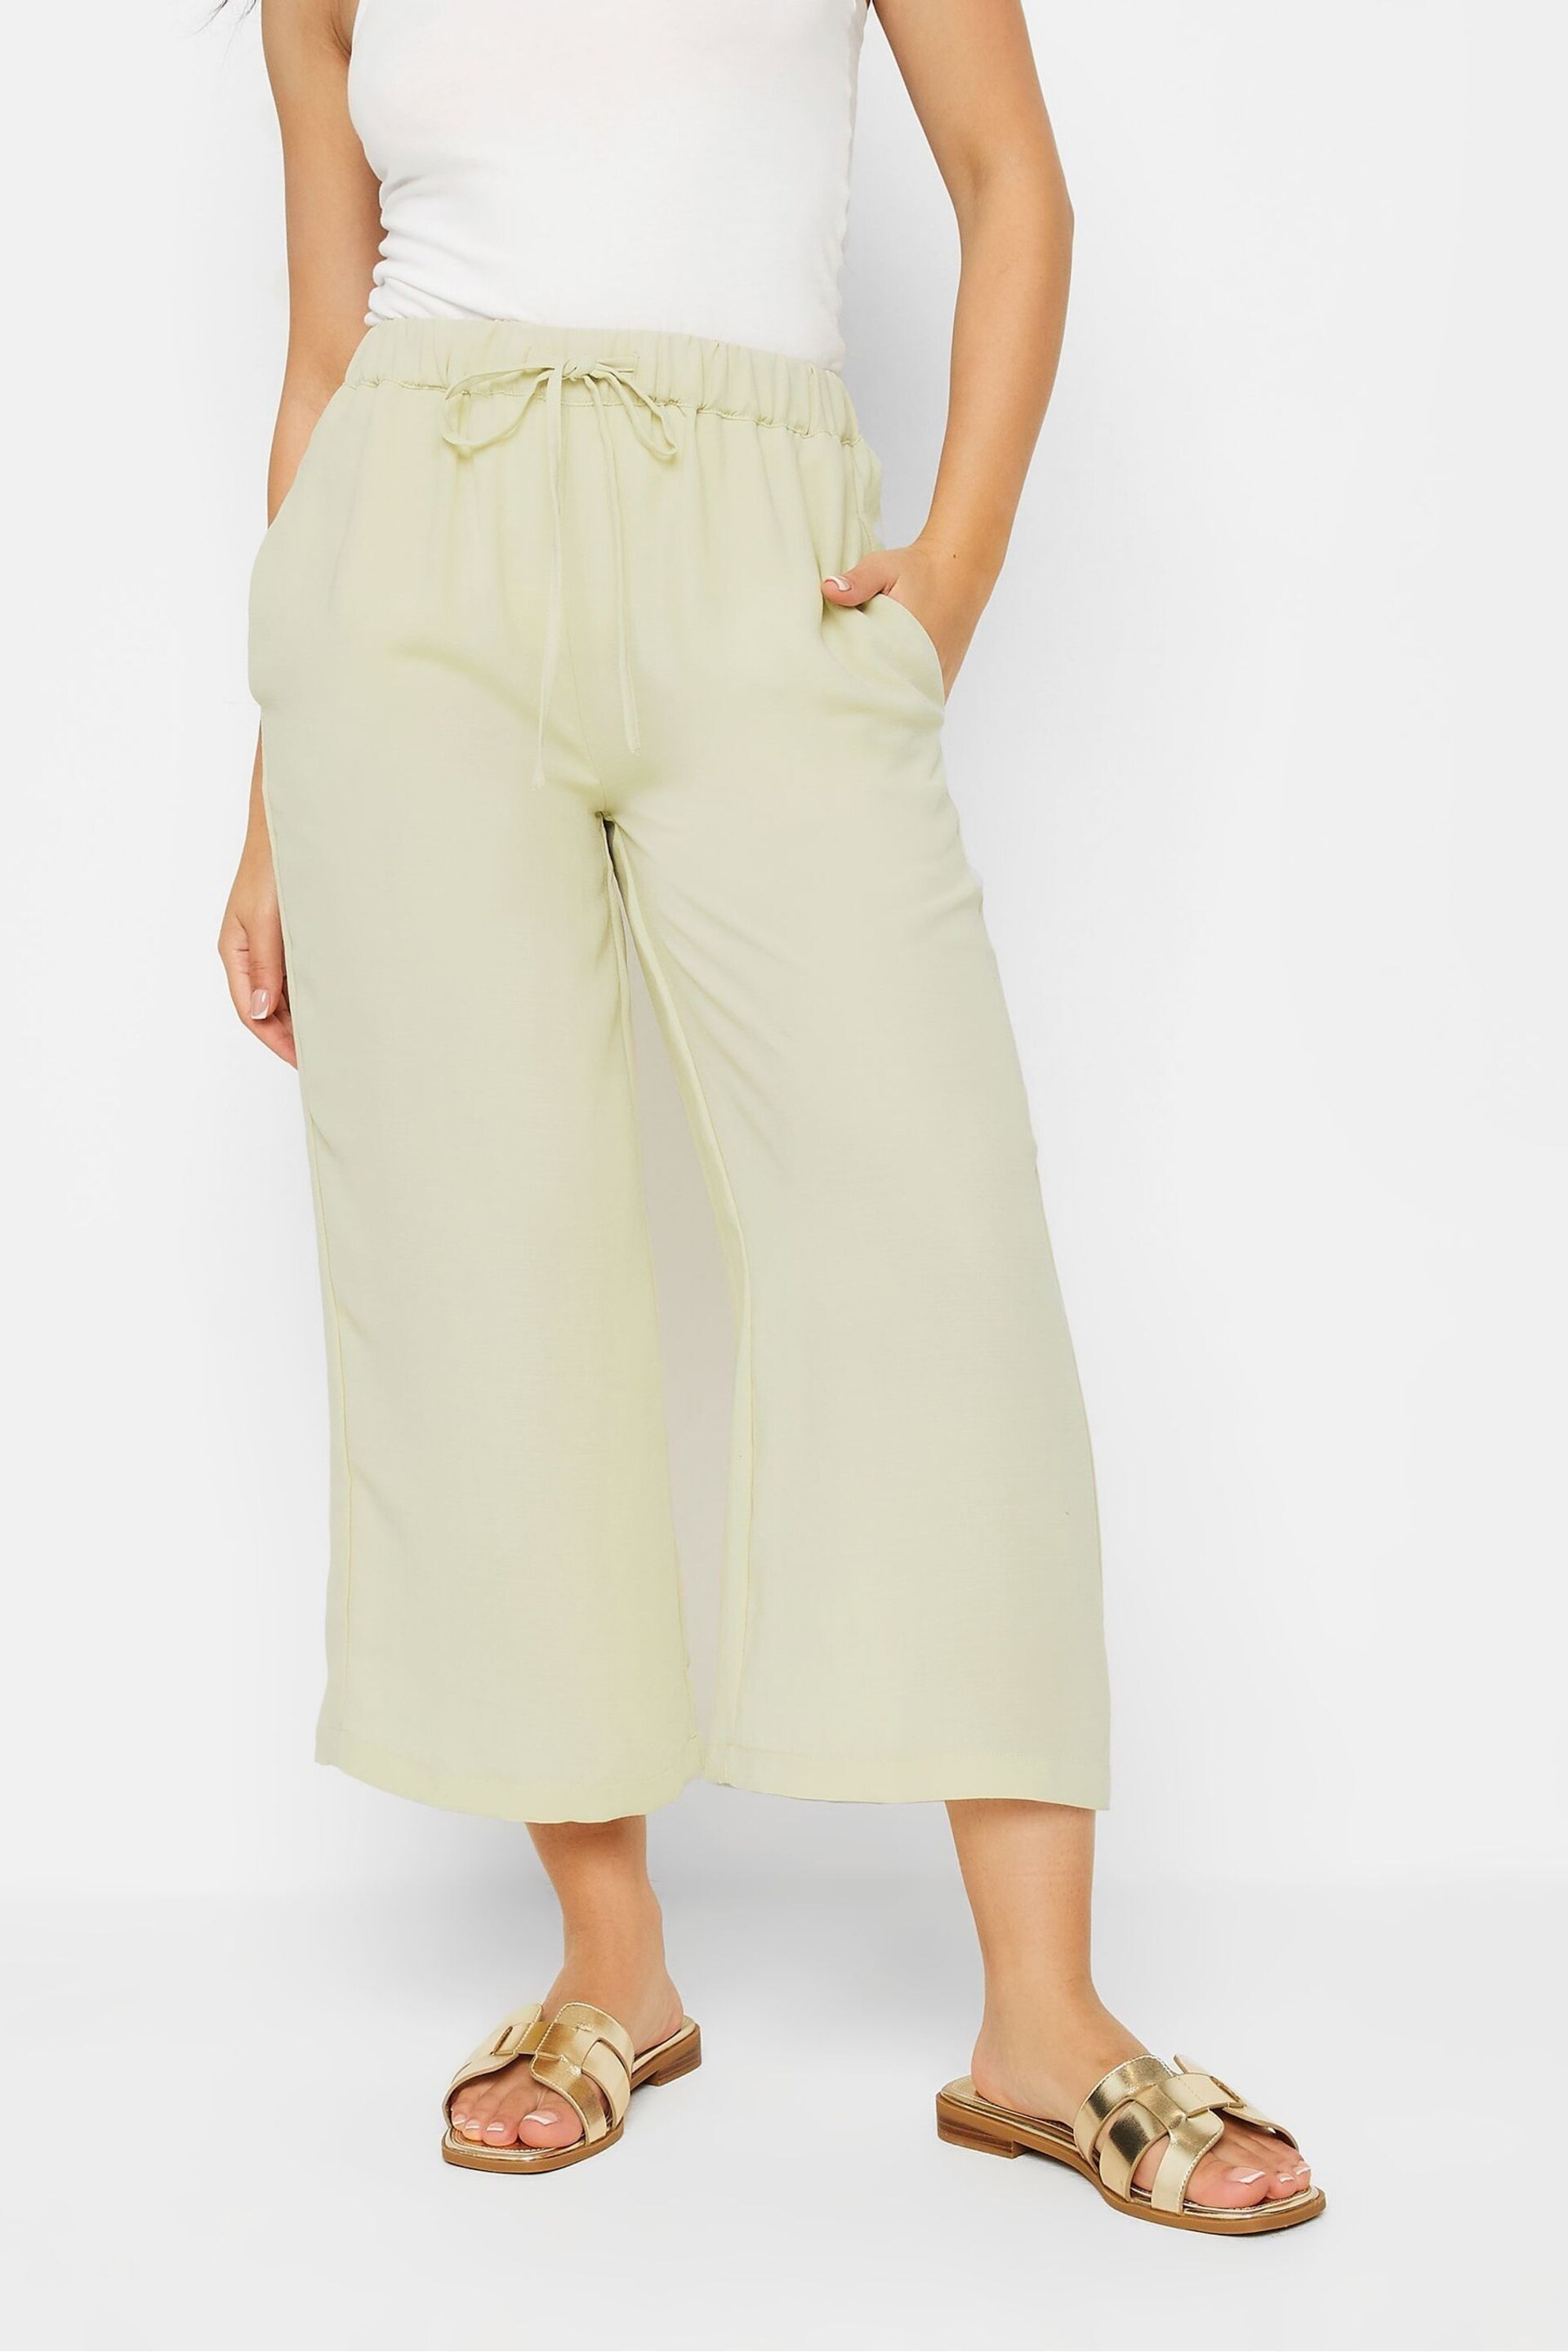 PixieGirl Petite Natural Utility Wide Leg Cropped Trousers - Image 2 of 5